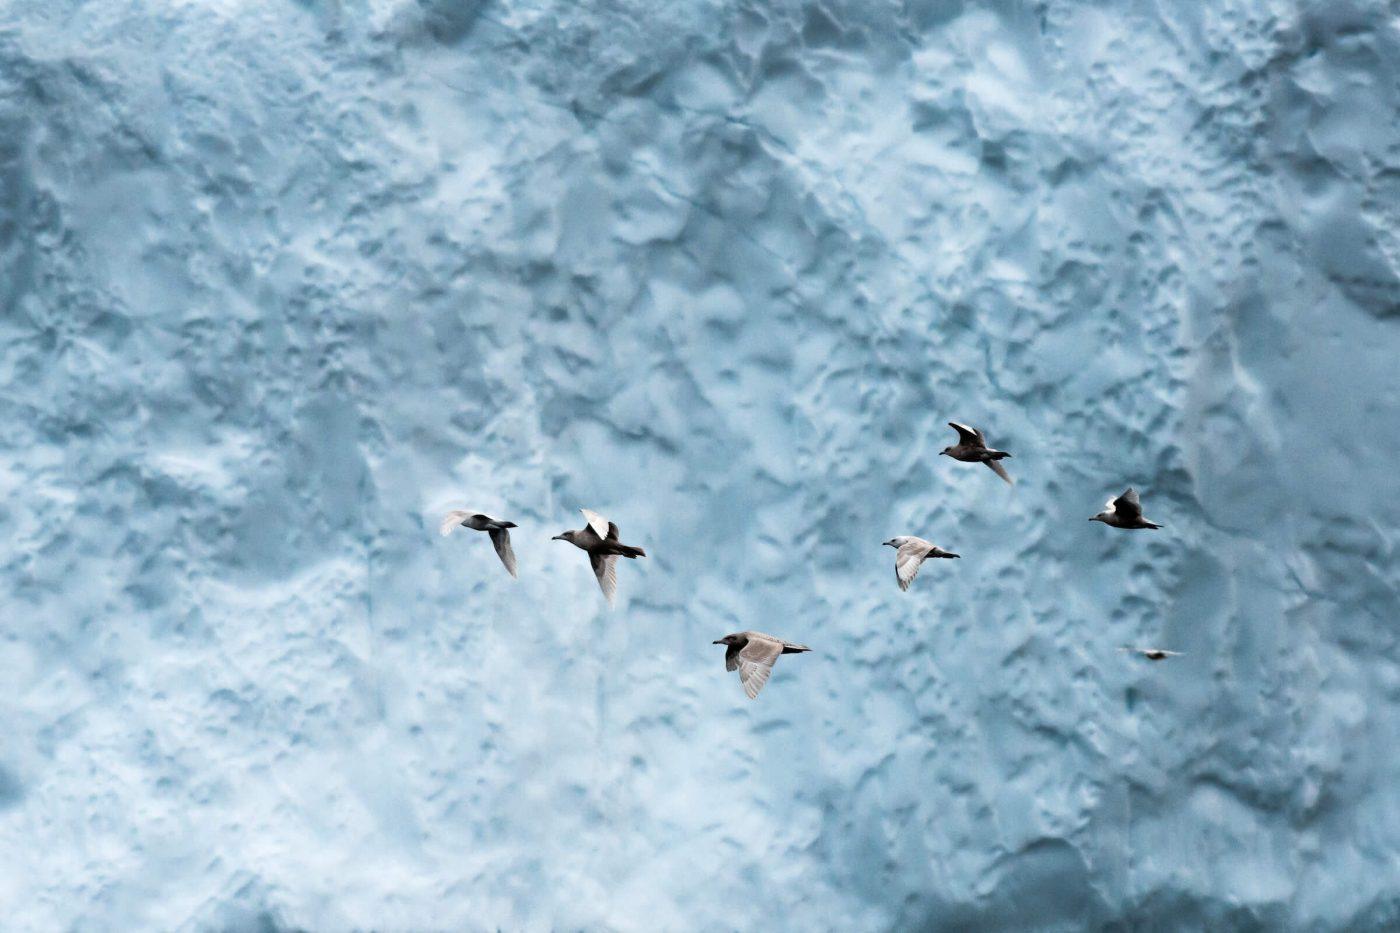 A flock of fulmar's took of as an iceberg close to them collapsed. I was amazed by the amount and variety of wildlife the Disko Bay has to offer. By Stian Klo